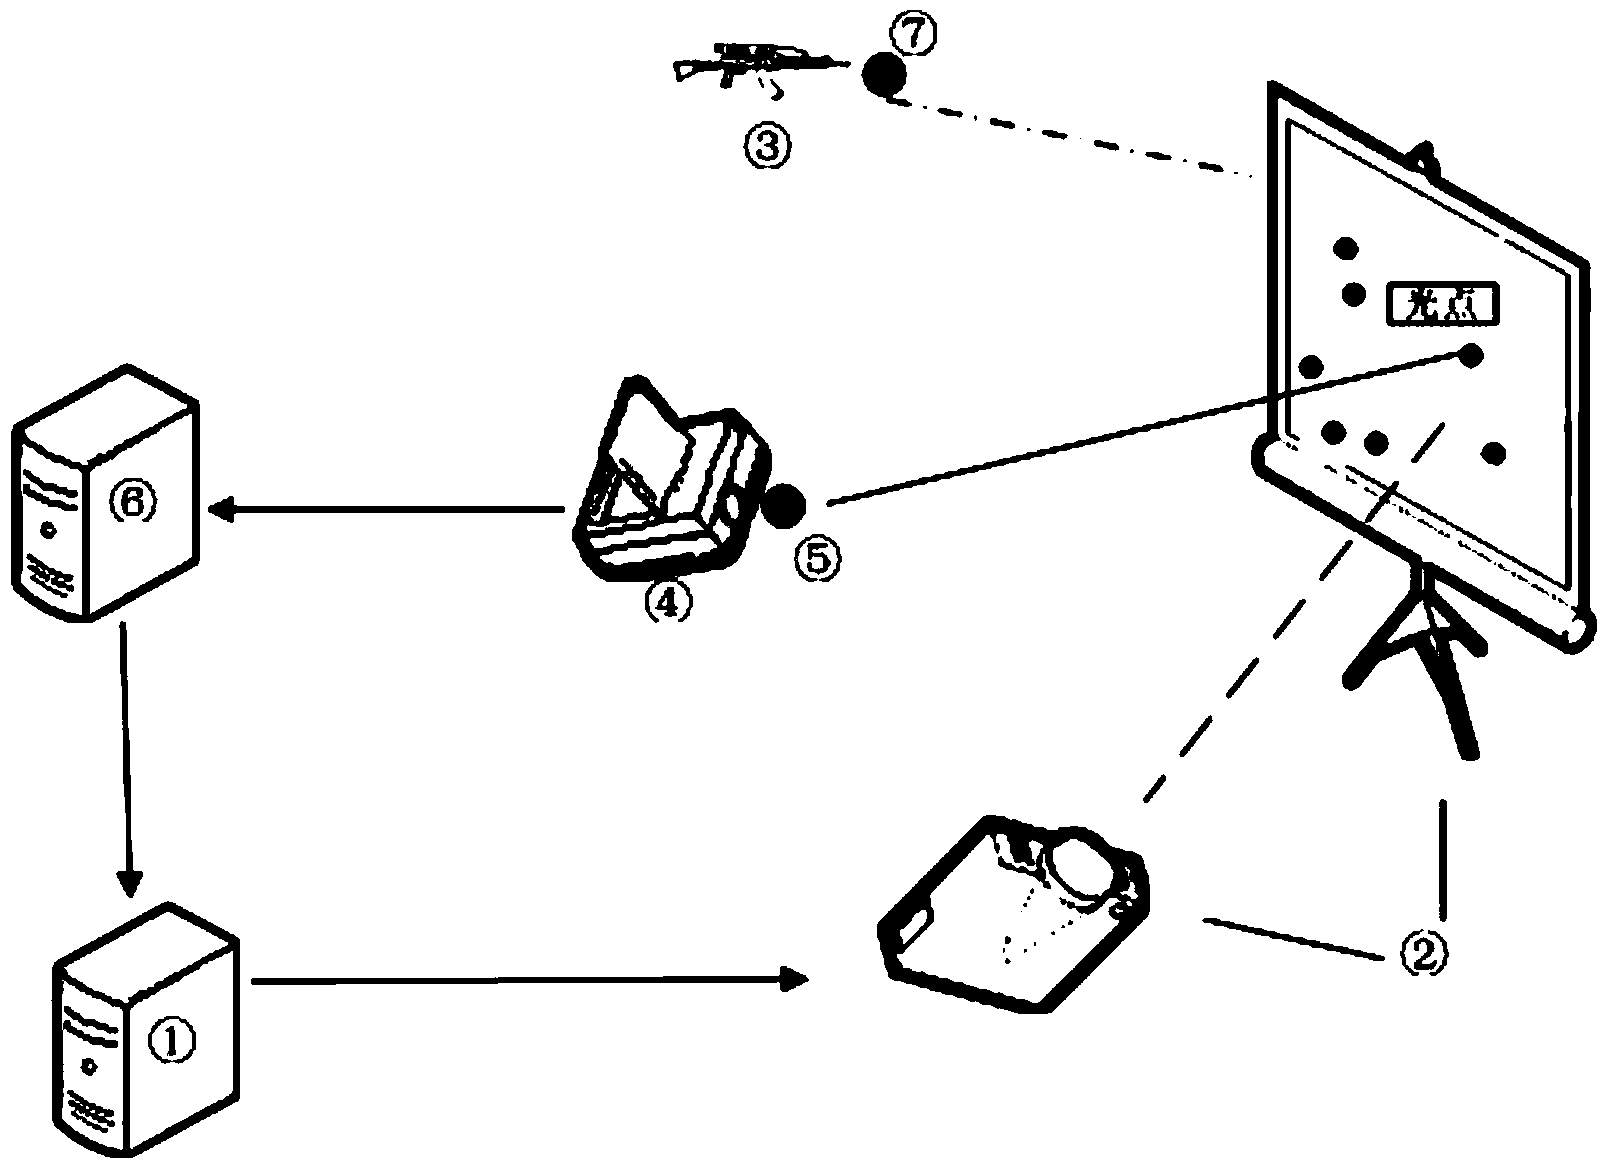 Laser target identifying system based on character pictures and identifying method of laser target identifying system